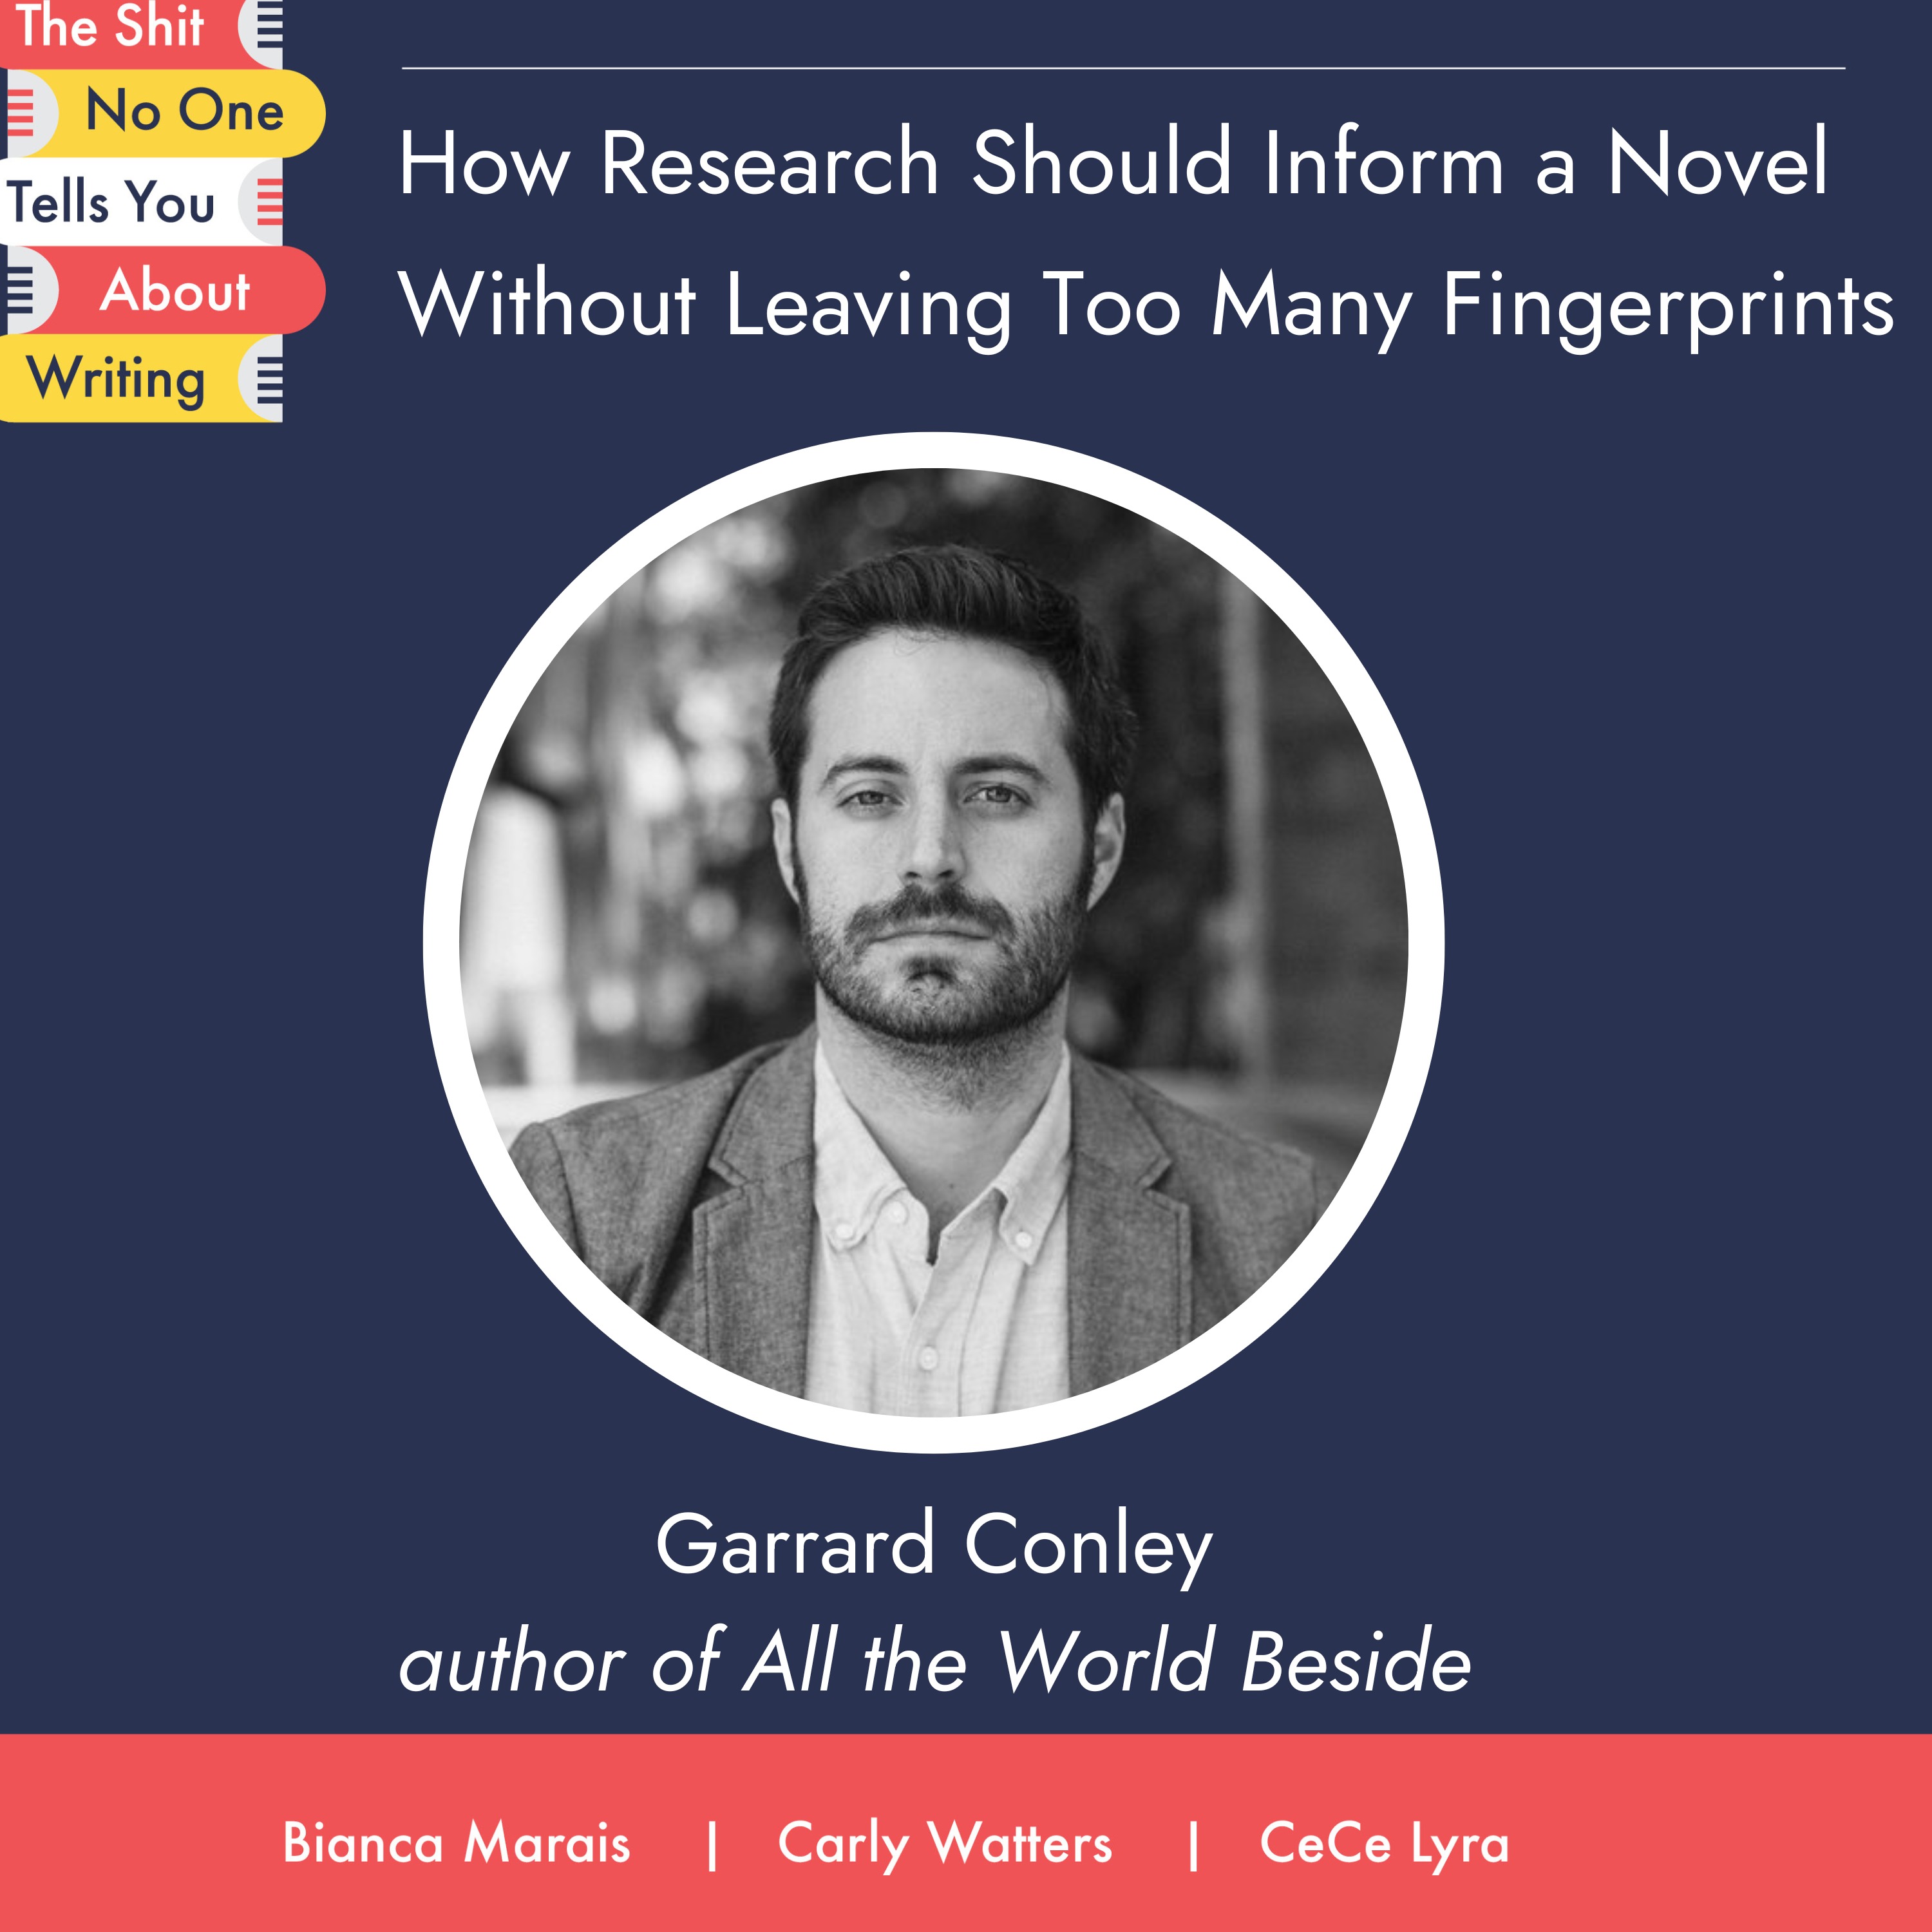 How Research Should Inform a Novel Without Leaving Too Many Fingerprints